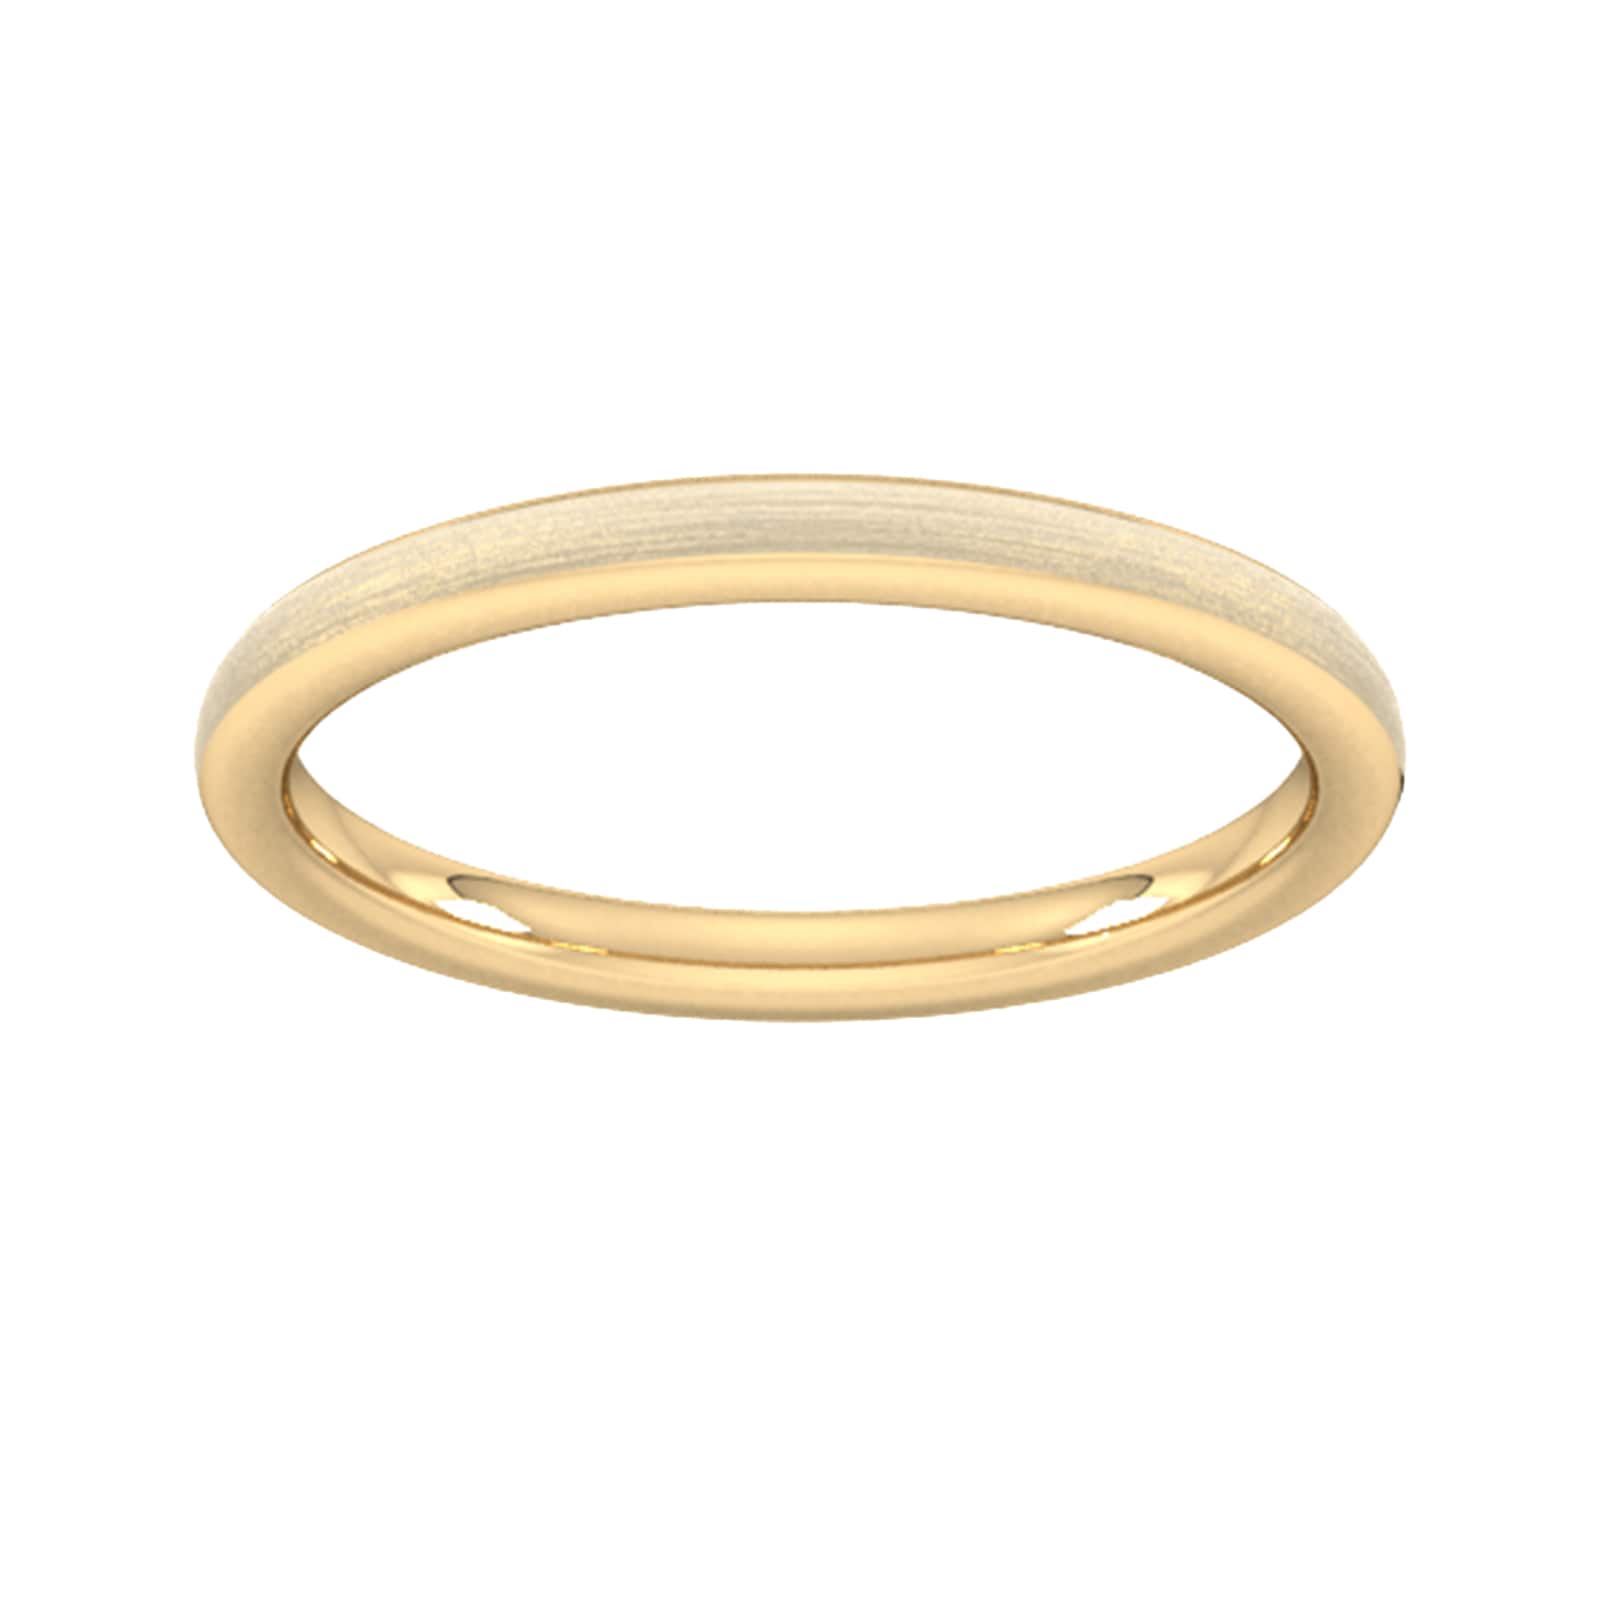 2mm Flat Court Heavy Matt Finished Wedding Ring In 18 Carat Yellow Gold - Ring Size R